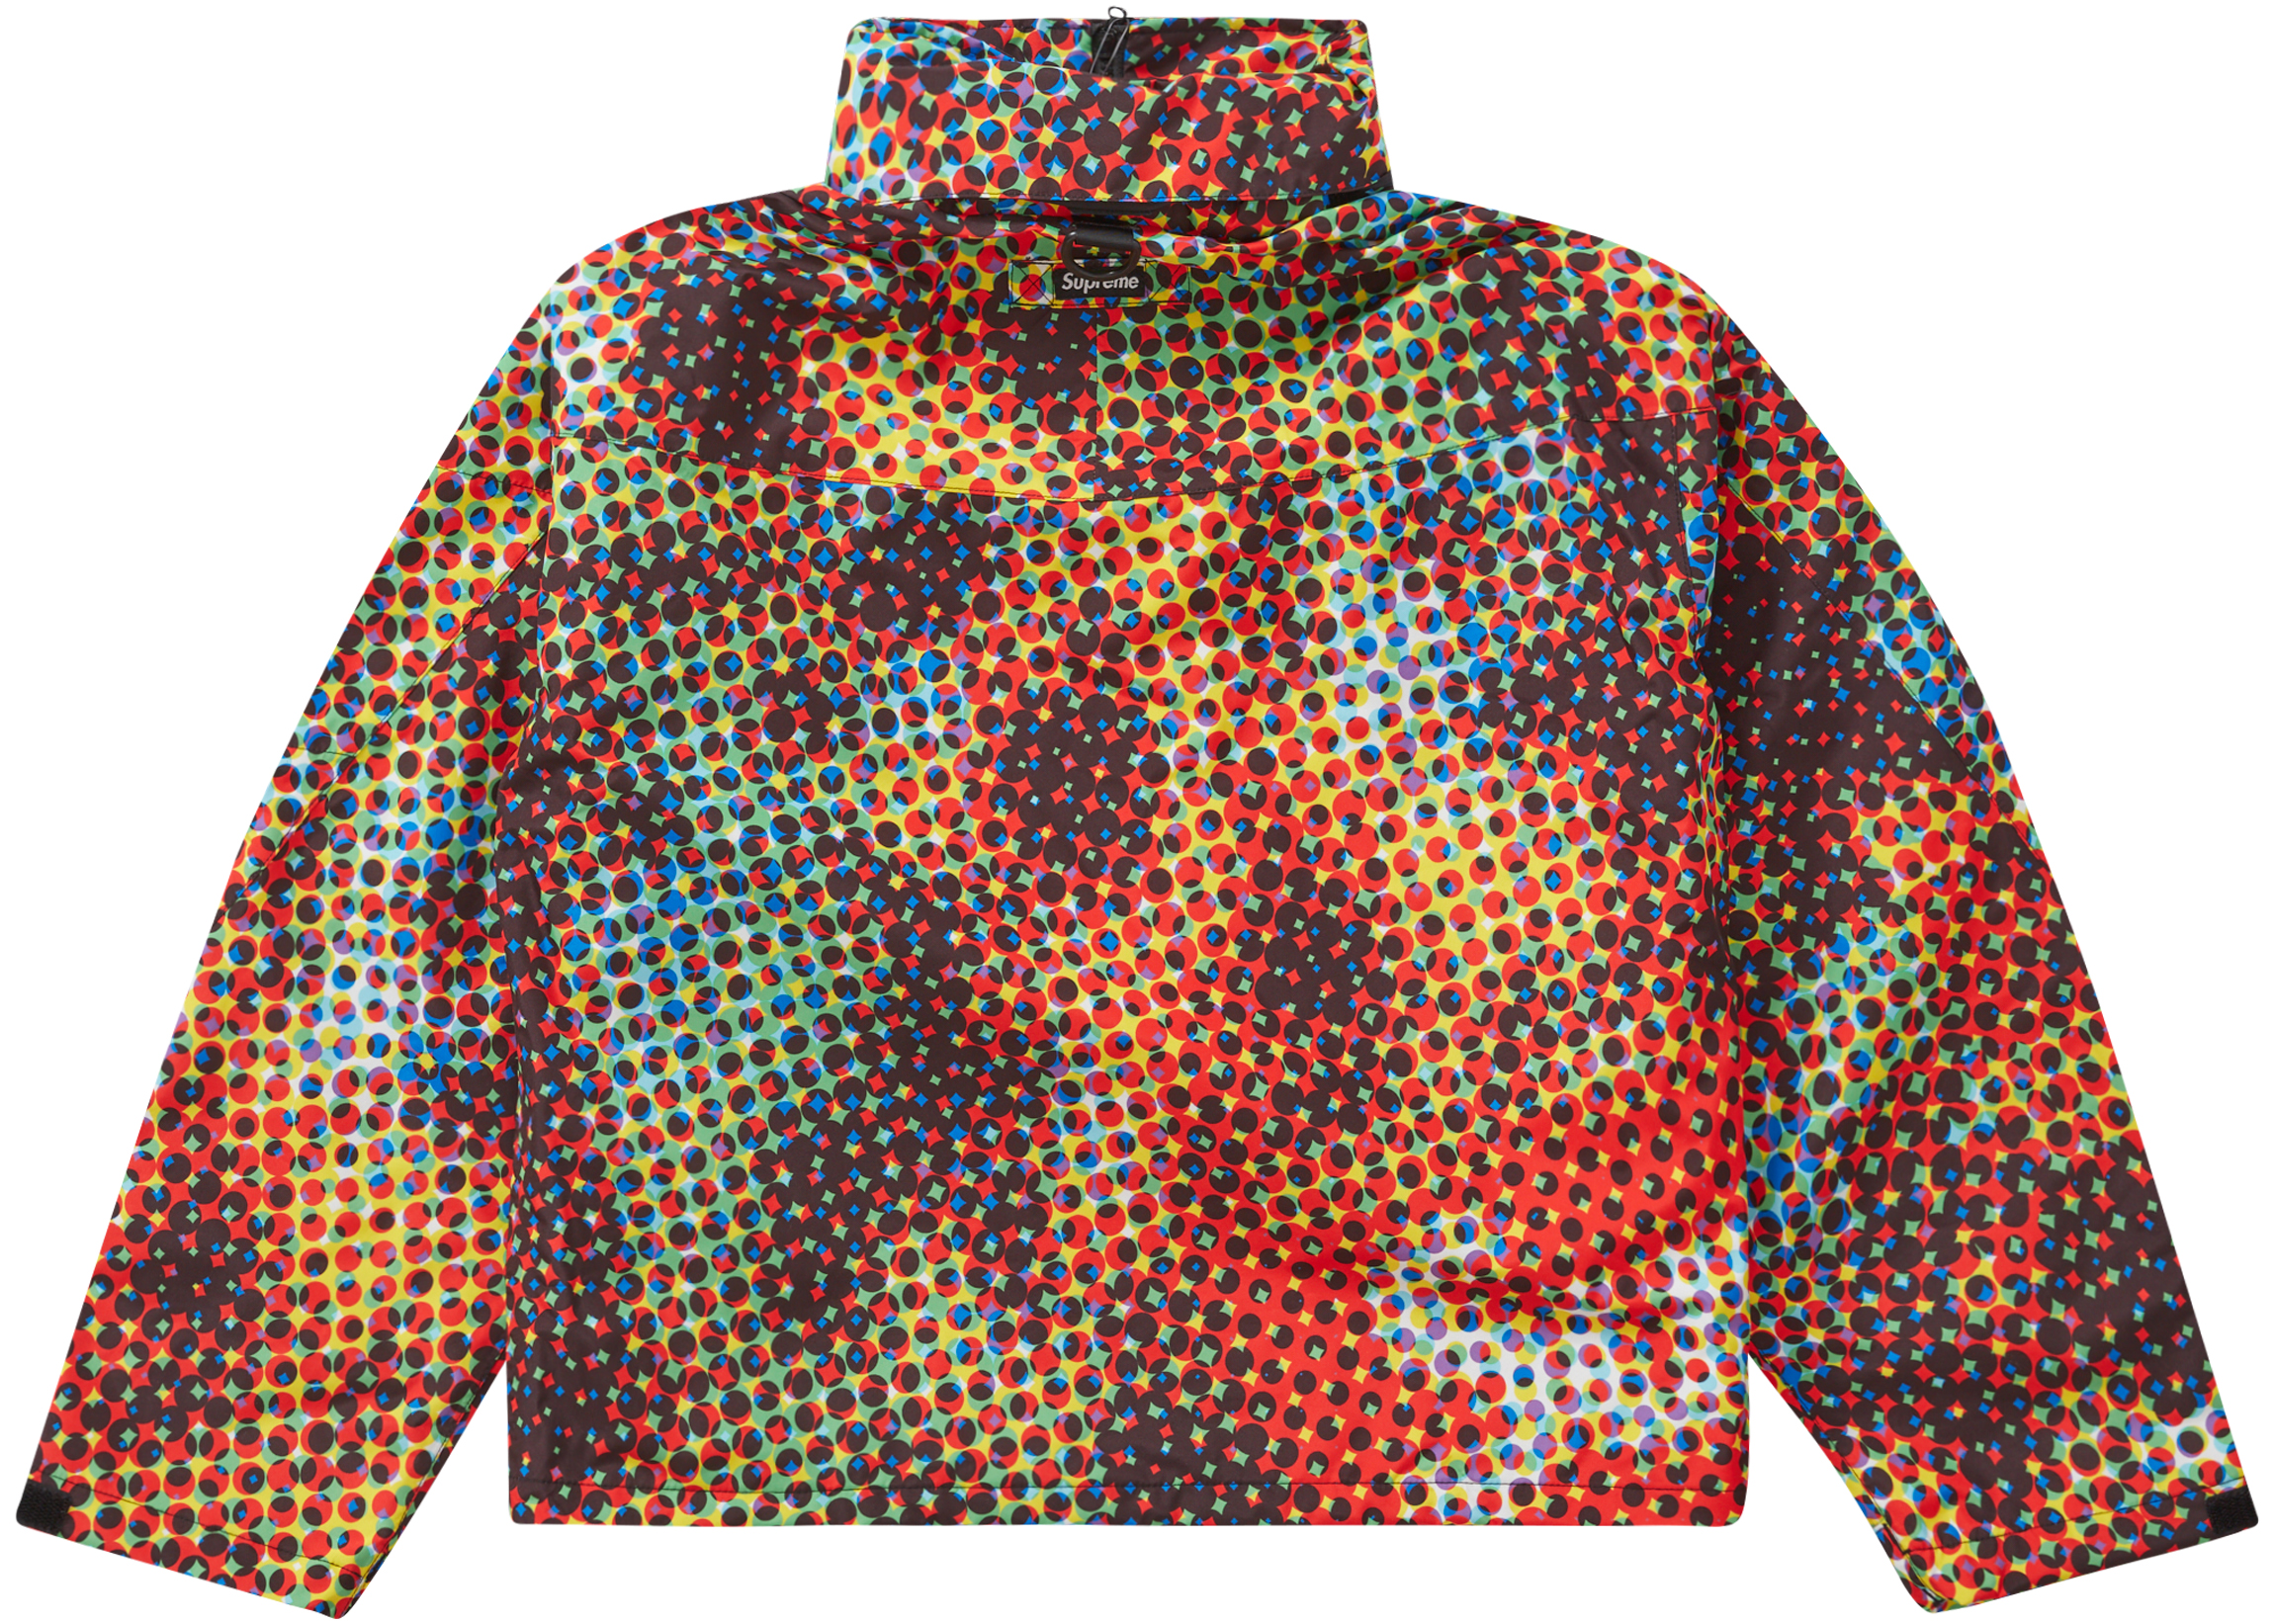 Supreme GORE-TEX PACLITE Lightweight Shell Jacket Multicolor